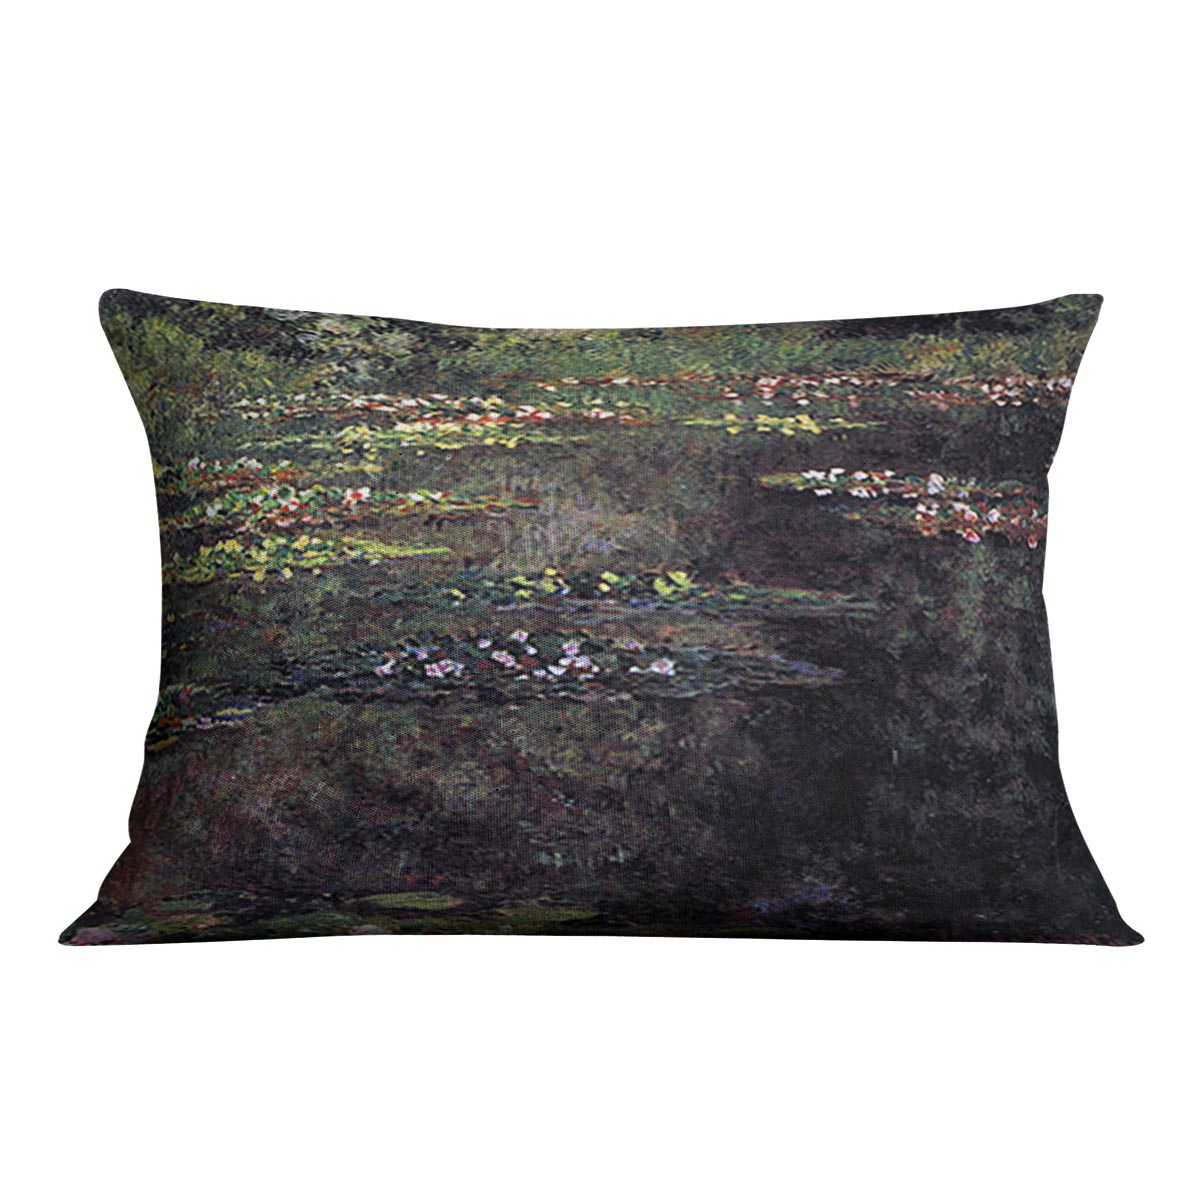 Water lilies water landscape 5 by Monet Cushion